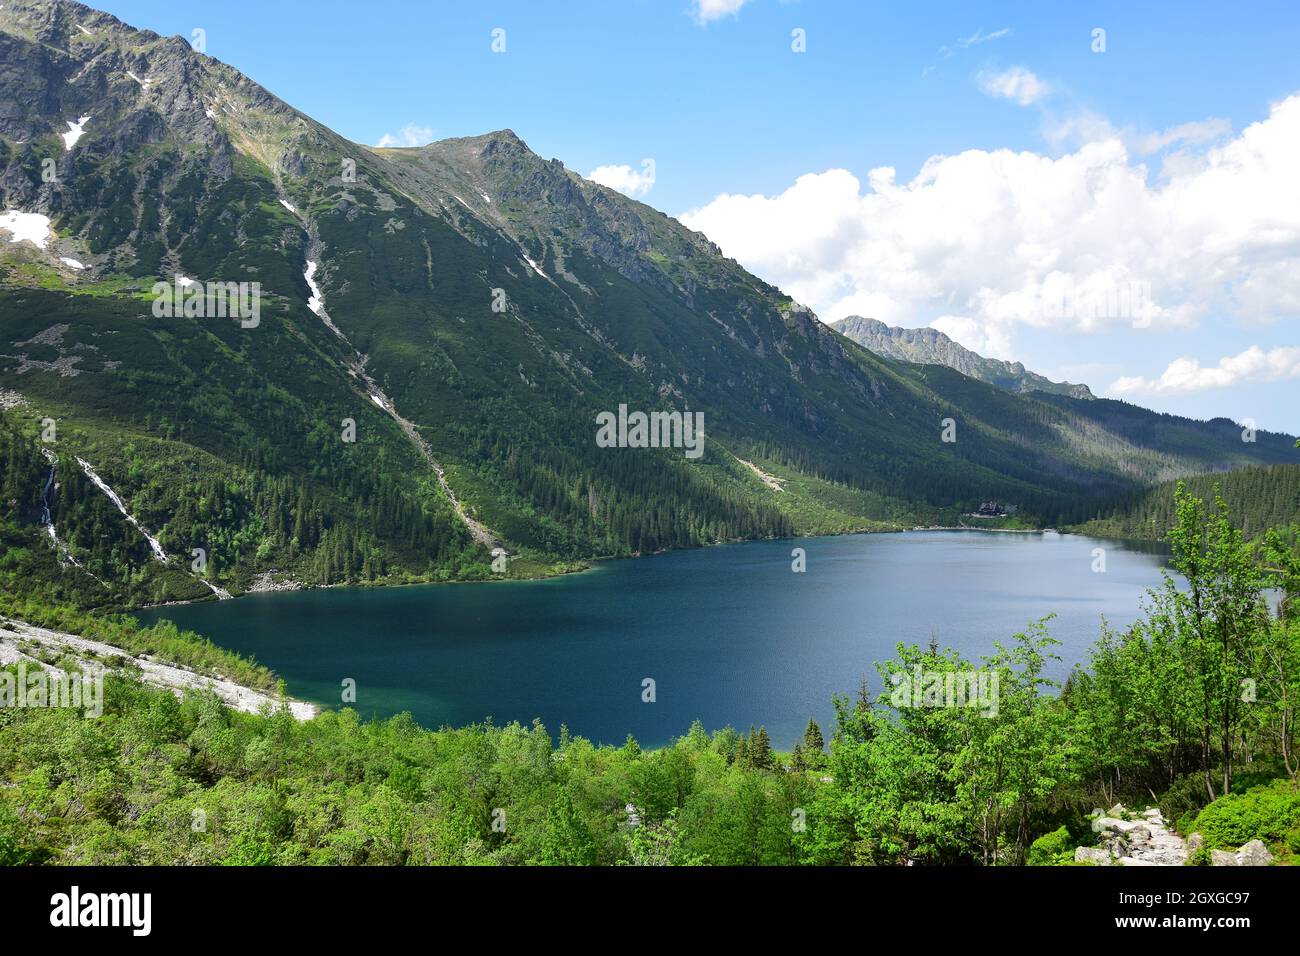 The beautiful Morskie oko, also called, Eye of the Sea, surrounded by the Tatra mountains. View from the lake above, Czarny staw pod rysami. Poland. Stock Photo